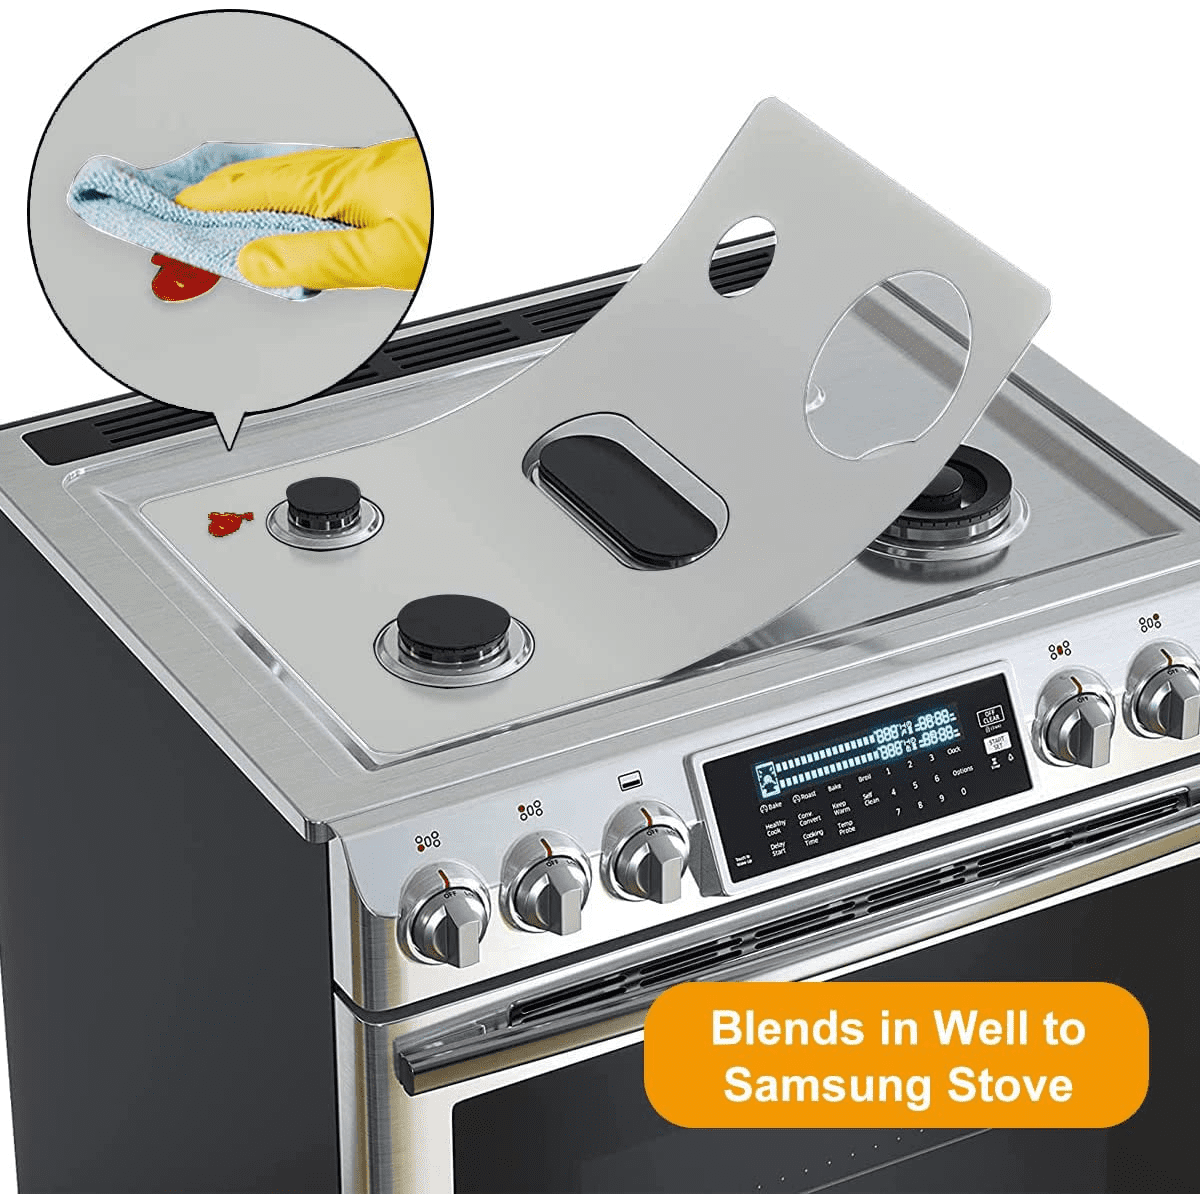 STOVE LAB-Platinum Grade Silicone Stove Cover| Samsung Stove Top Protector|  Heat Resistant & Reusable Stove Guard Stove Top Protector| Non-Stick Stove